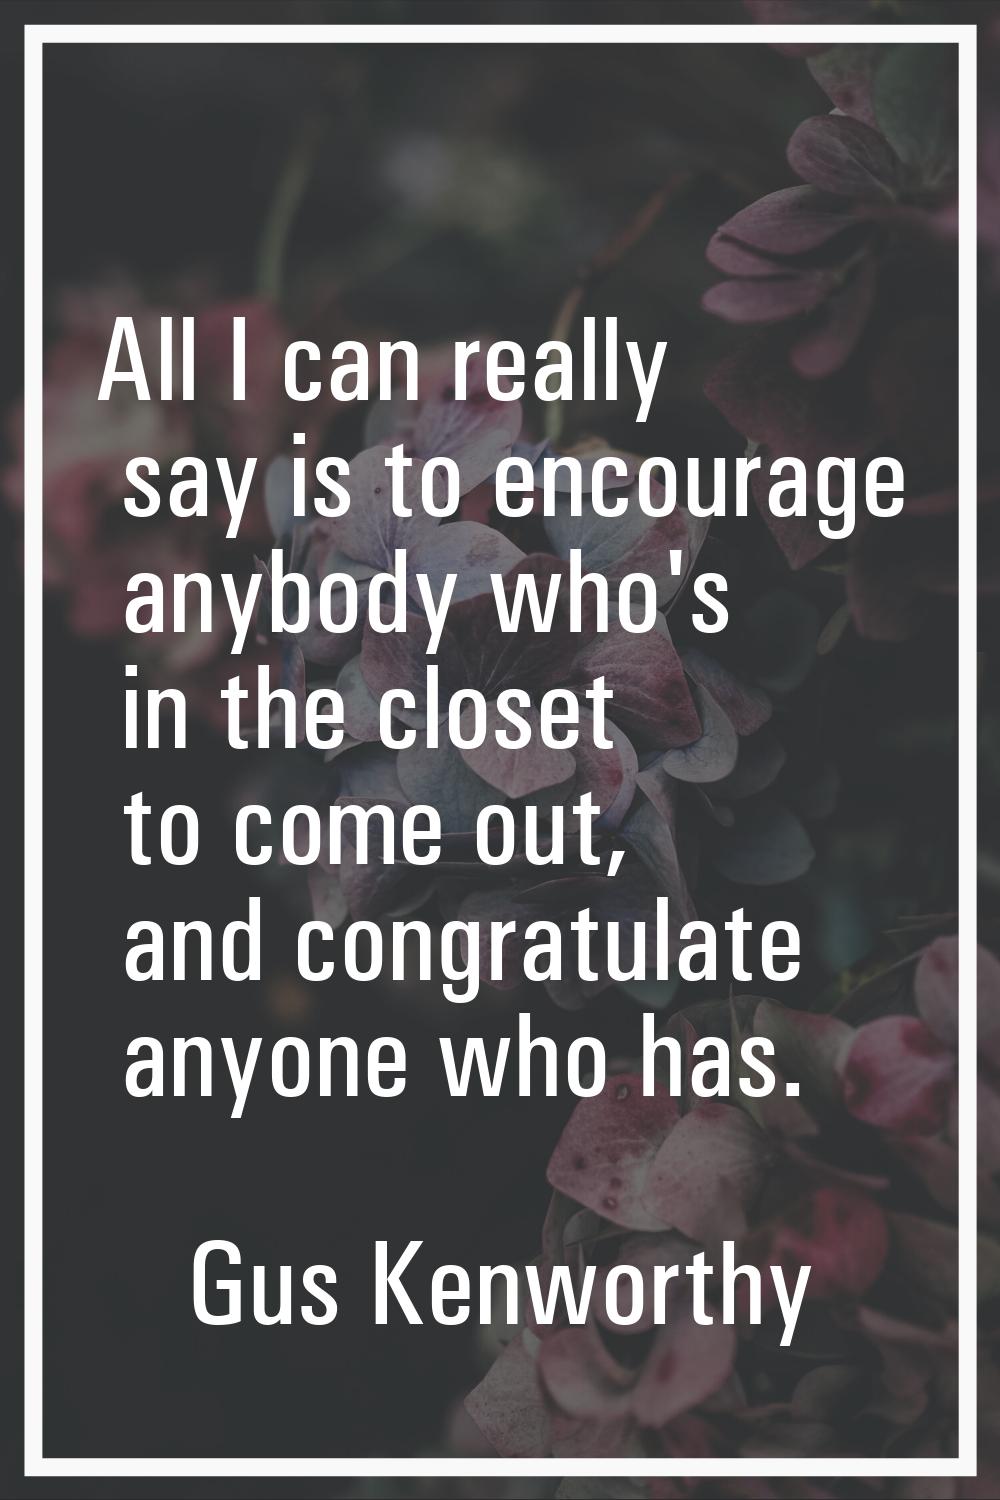 All I can really say is to encourage anybody who's in the closet to come out, and congratulate anyo